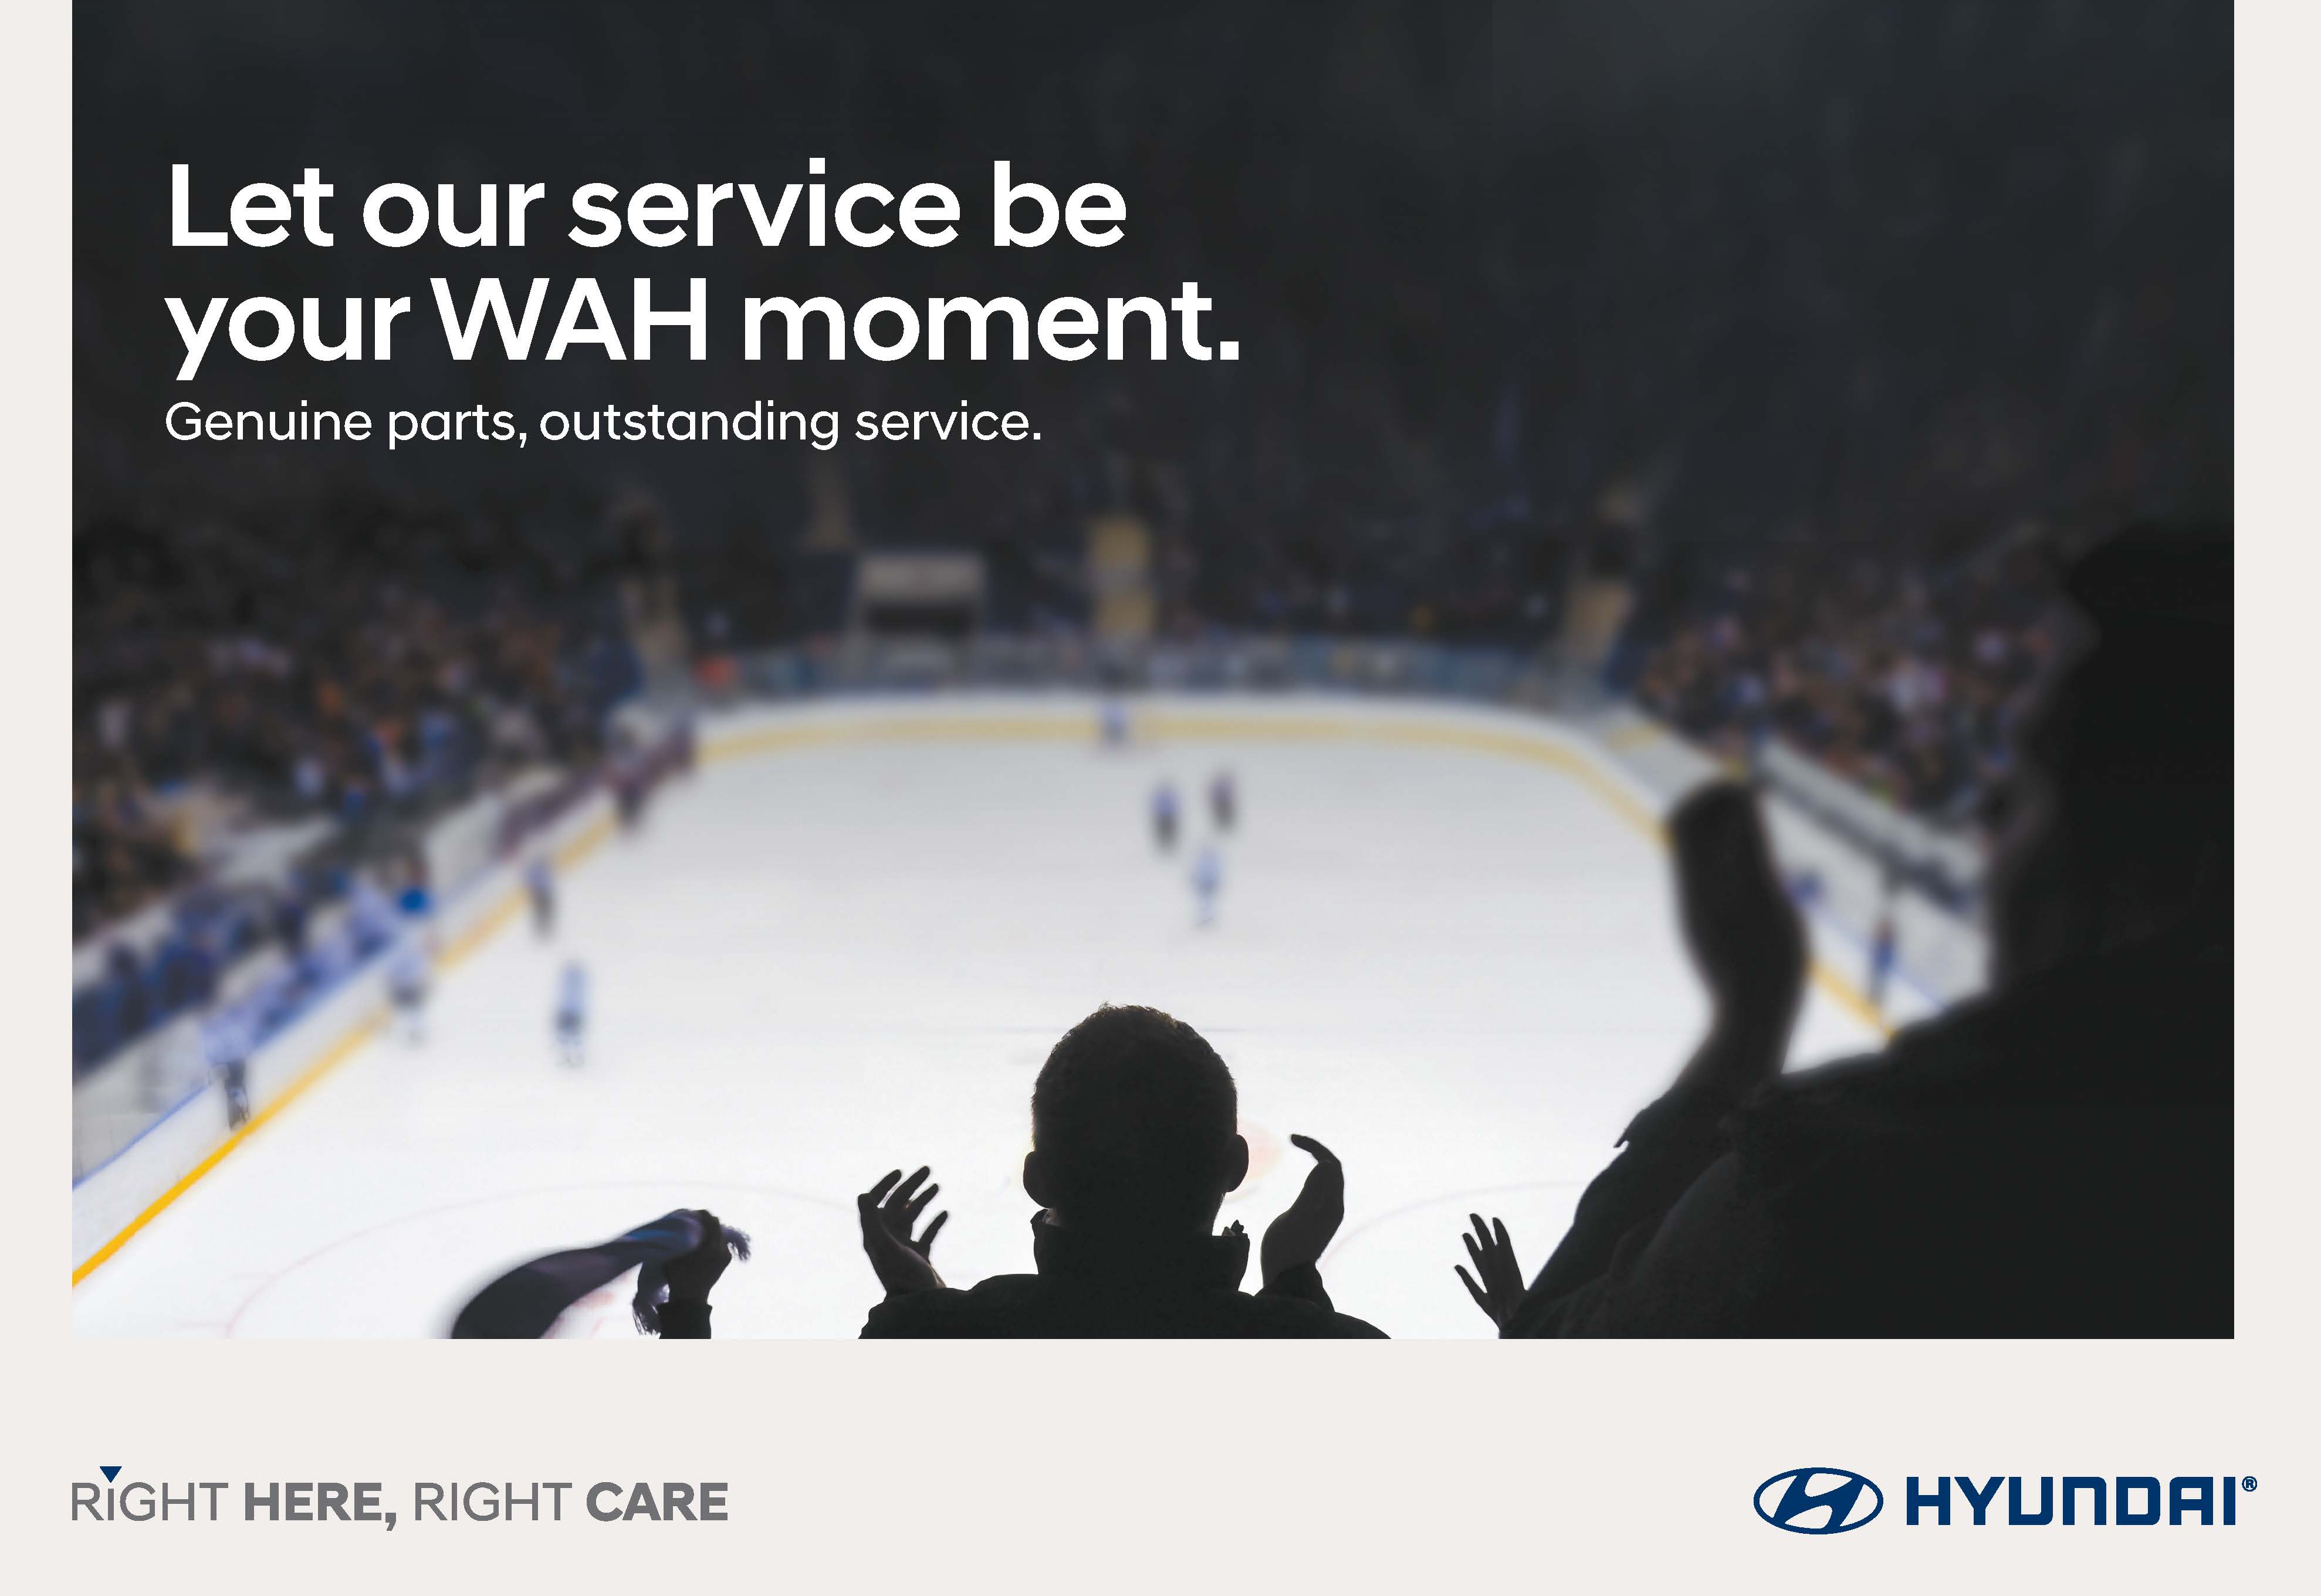 Let our service be your WAH moment.